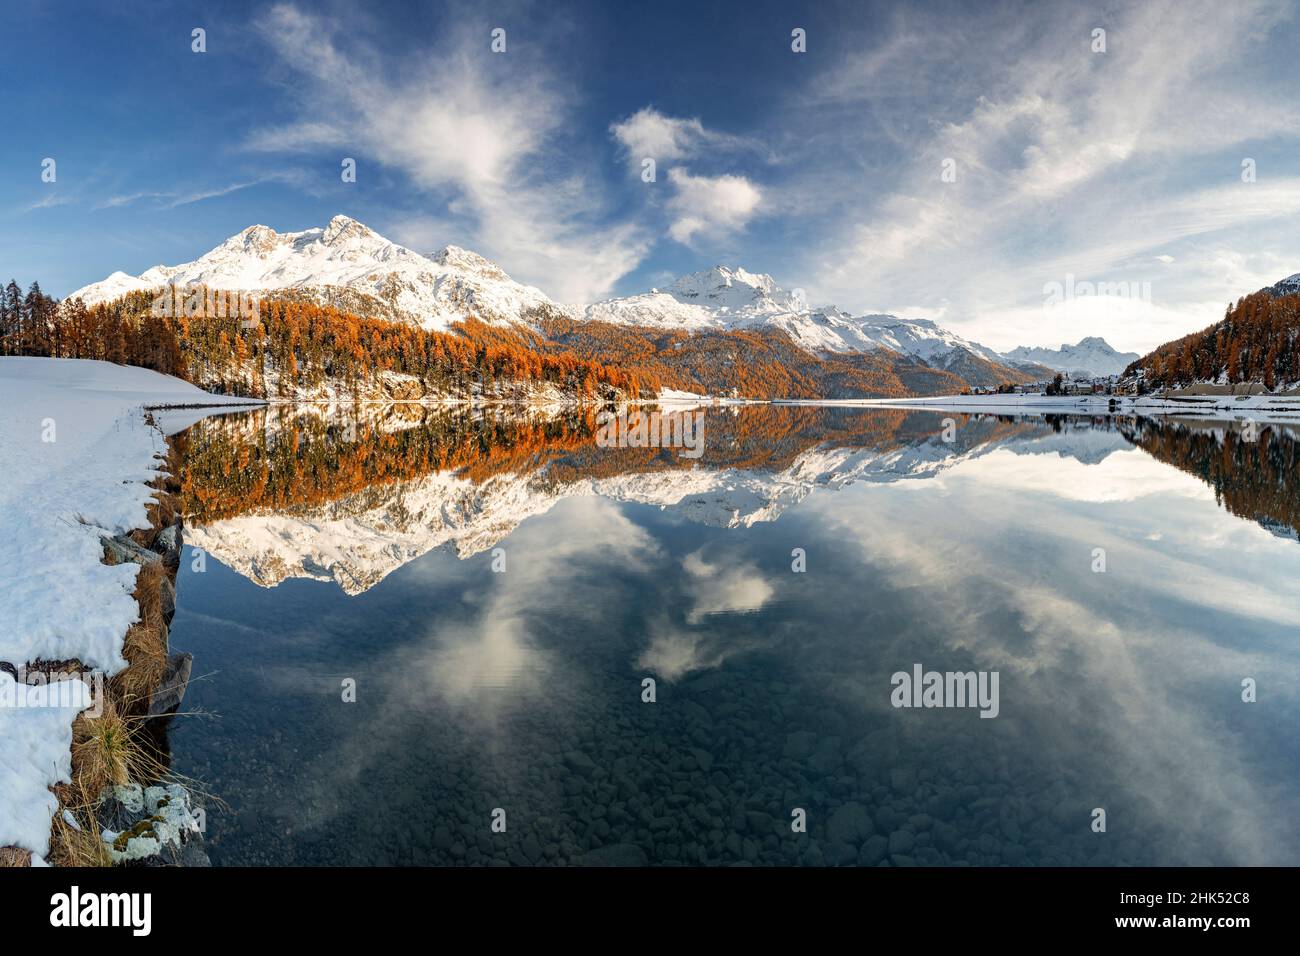 Autumn woods and snowcapped mountains mirrored in the clear water of Champfer lake at sunset, Engadine, Graubunden, Switzerland, Europe Stock Photo